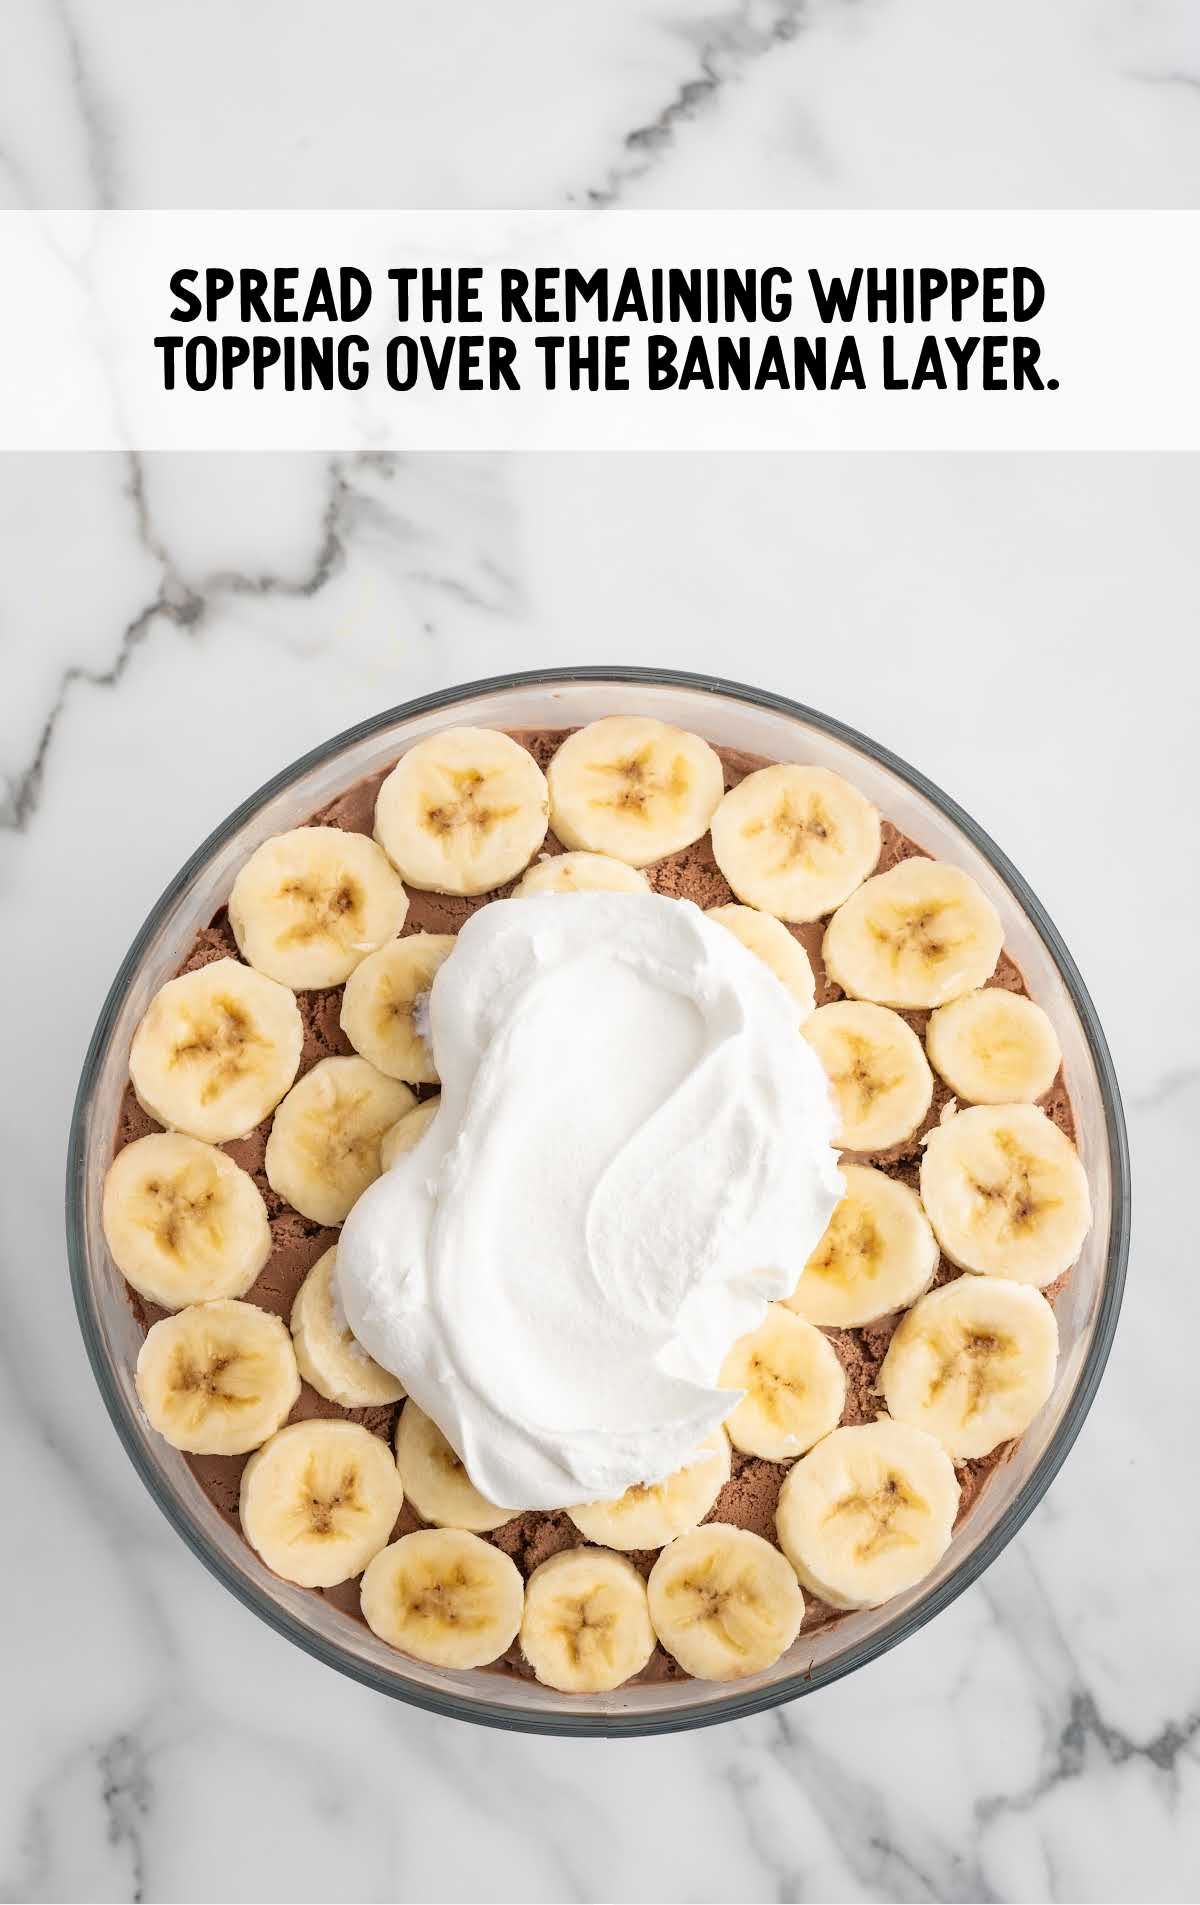 whipped topping spread over the banana layer